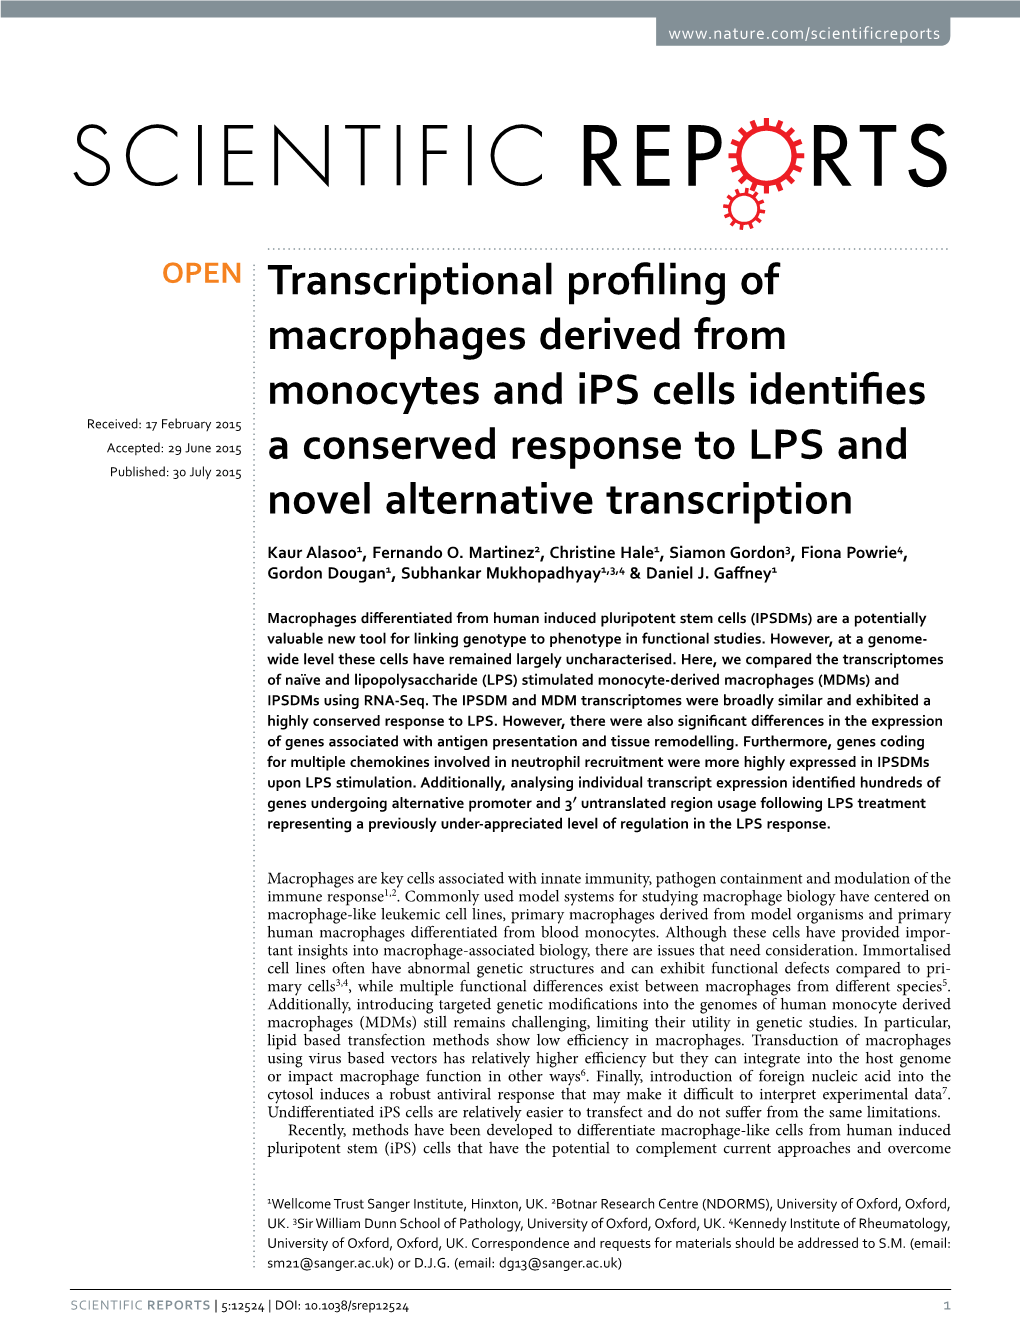 Transcriptional Profiling of Macrophages Derived From